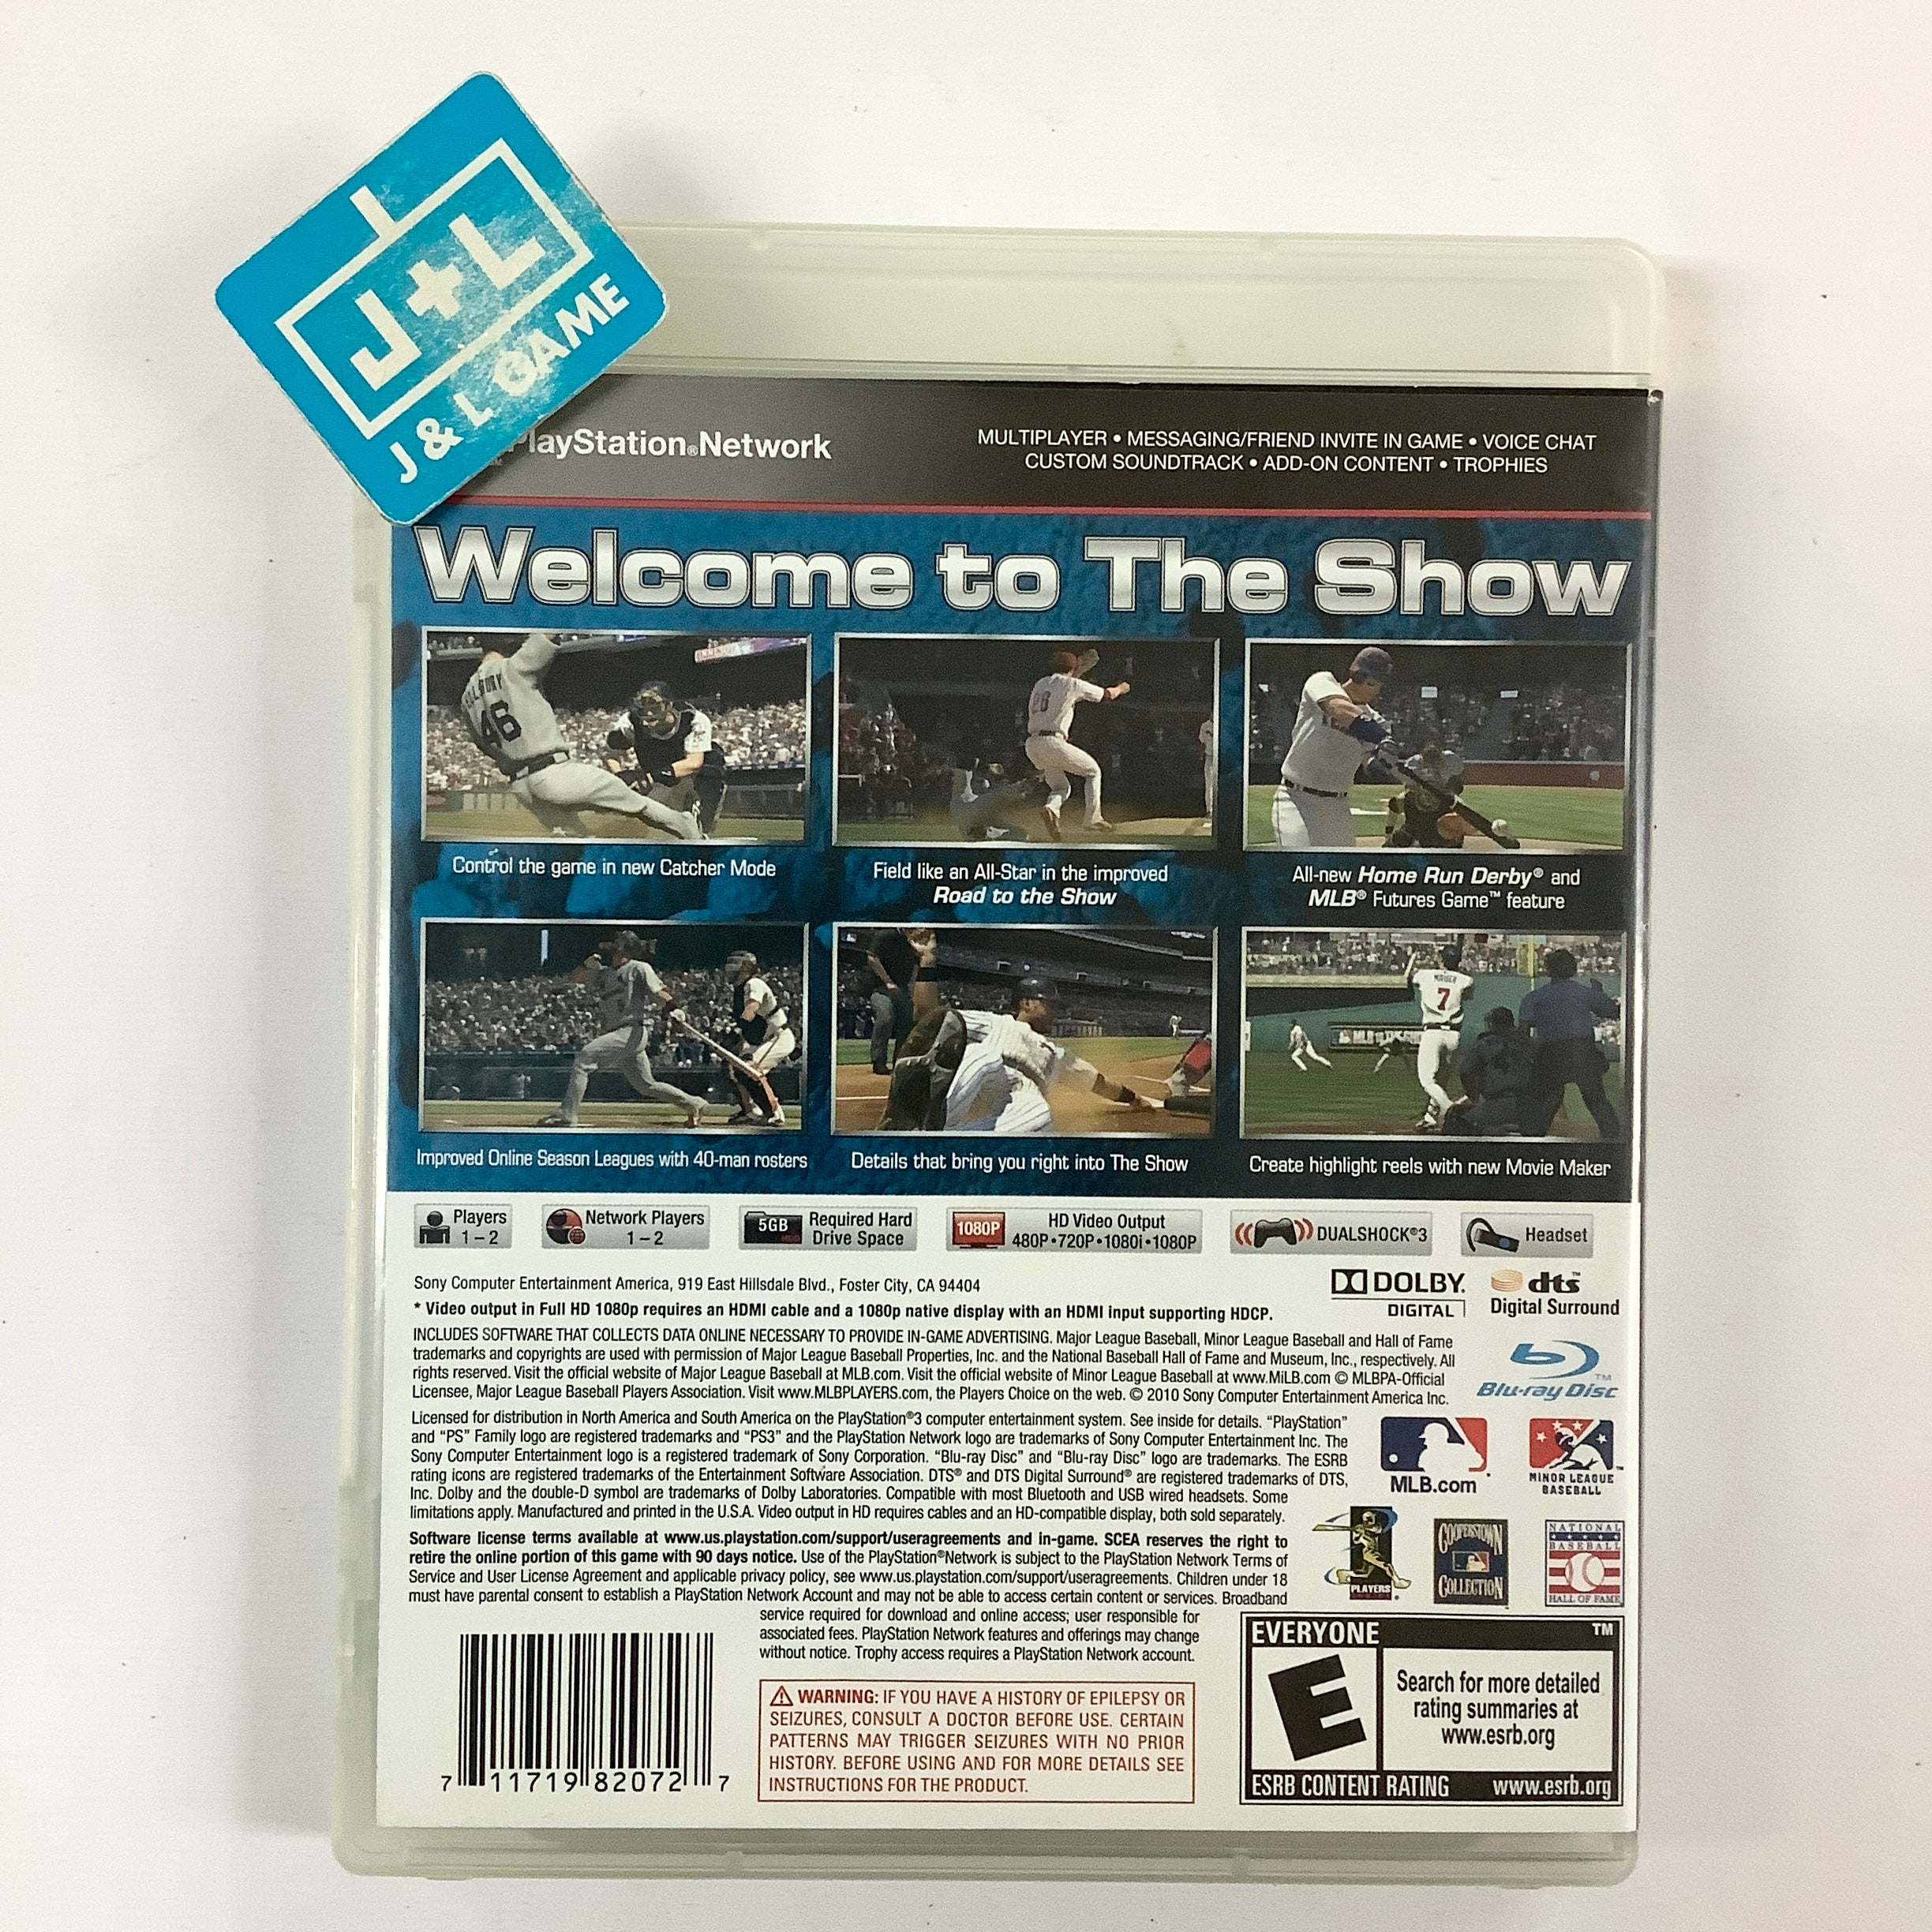 MLB 10: The Show - (PS3) PlayStation 3 [Pre-Owned] Video Games SCEA   